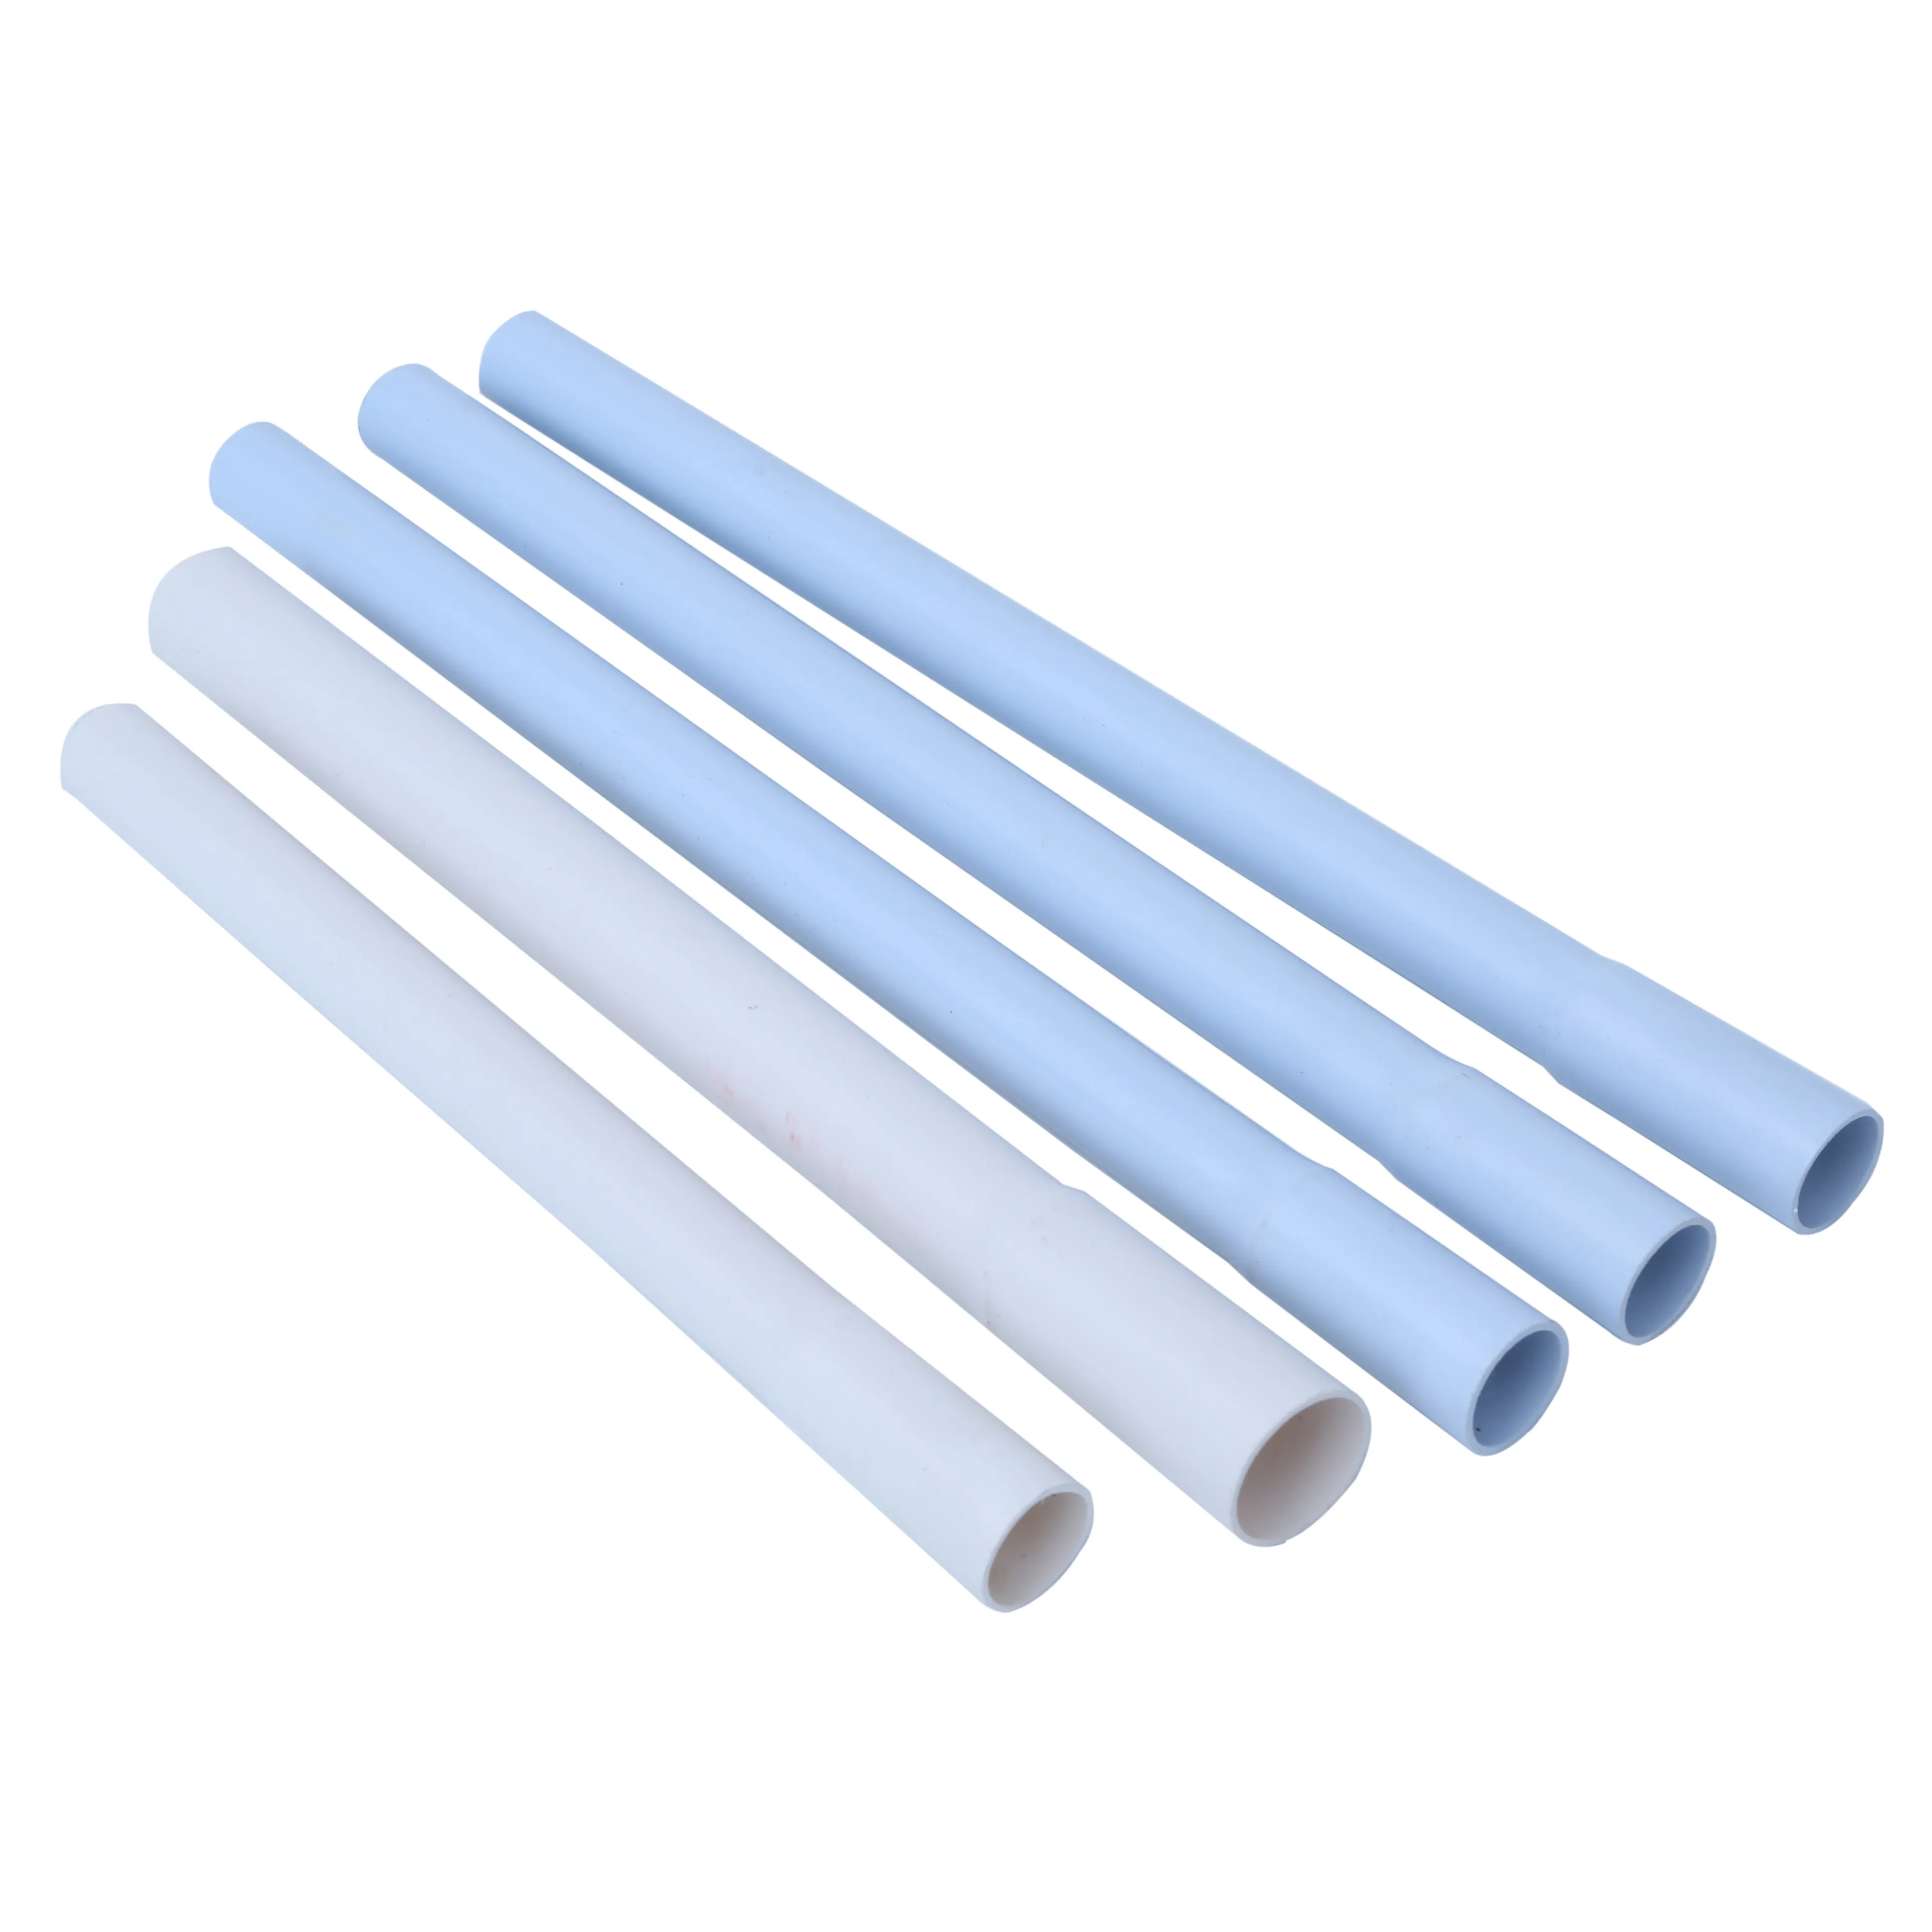 Wholesale plastic pipe Factory price UPVC heat resistant Wire Duct Rigid Electrical Conduit Pipes with socket 16mm 20mm 25mm